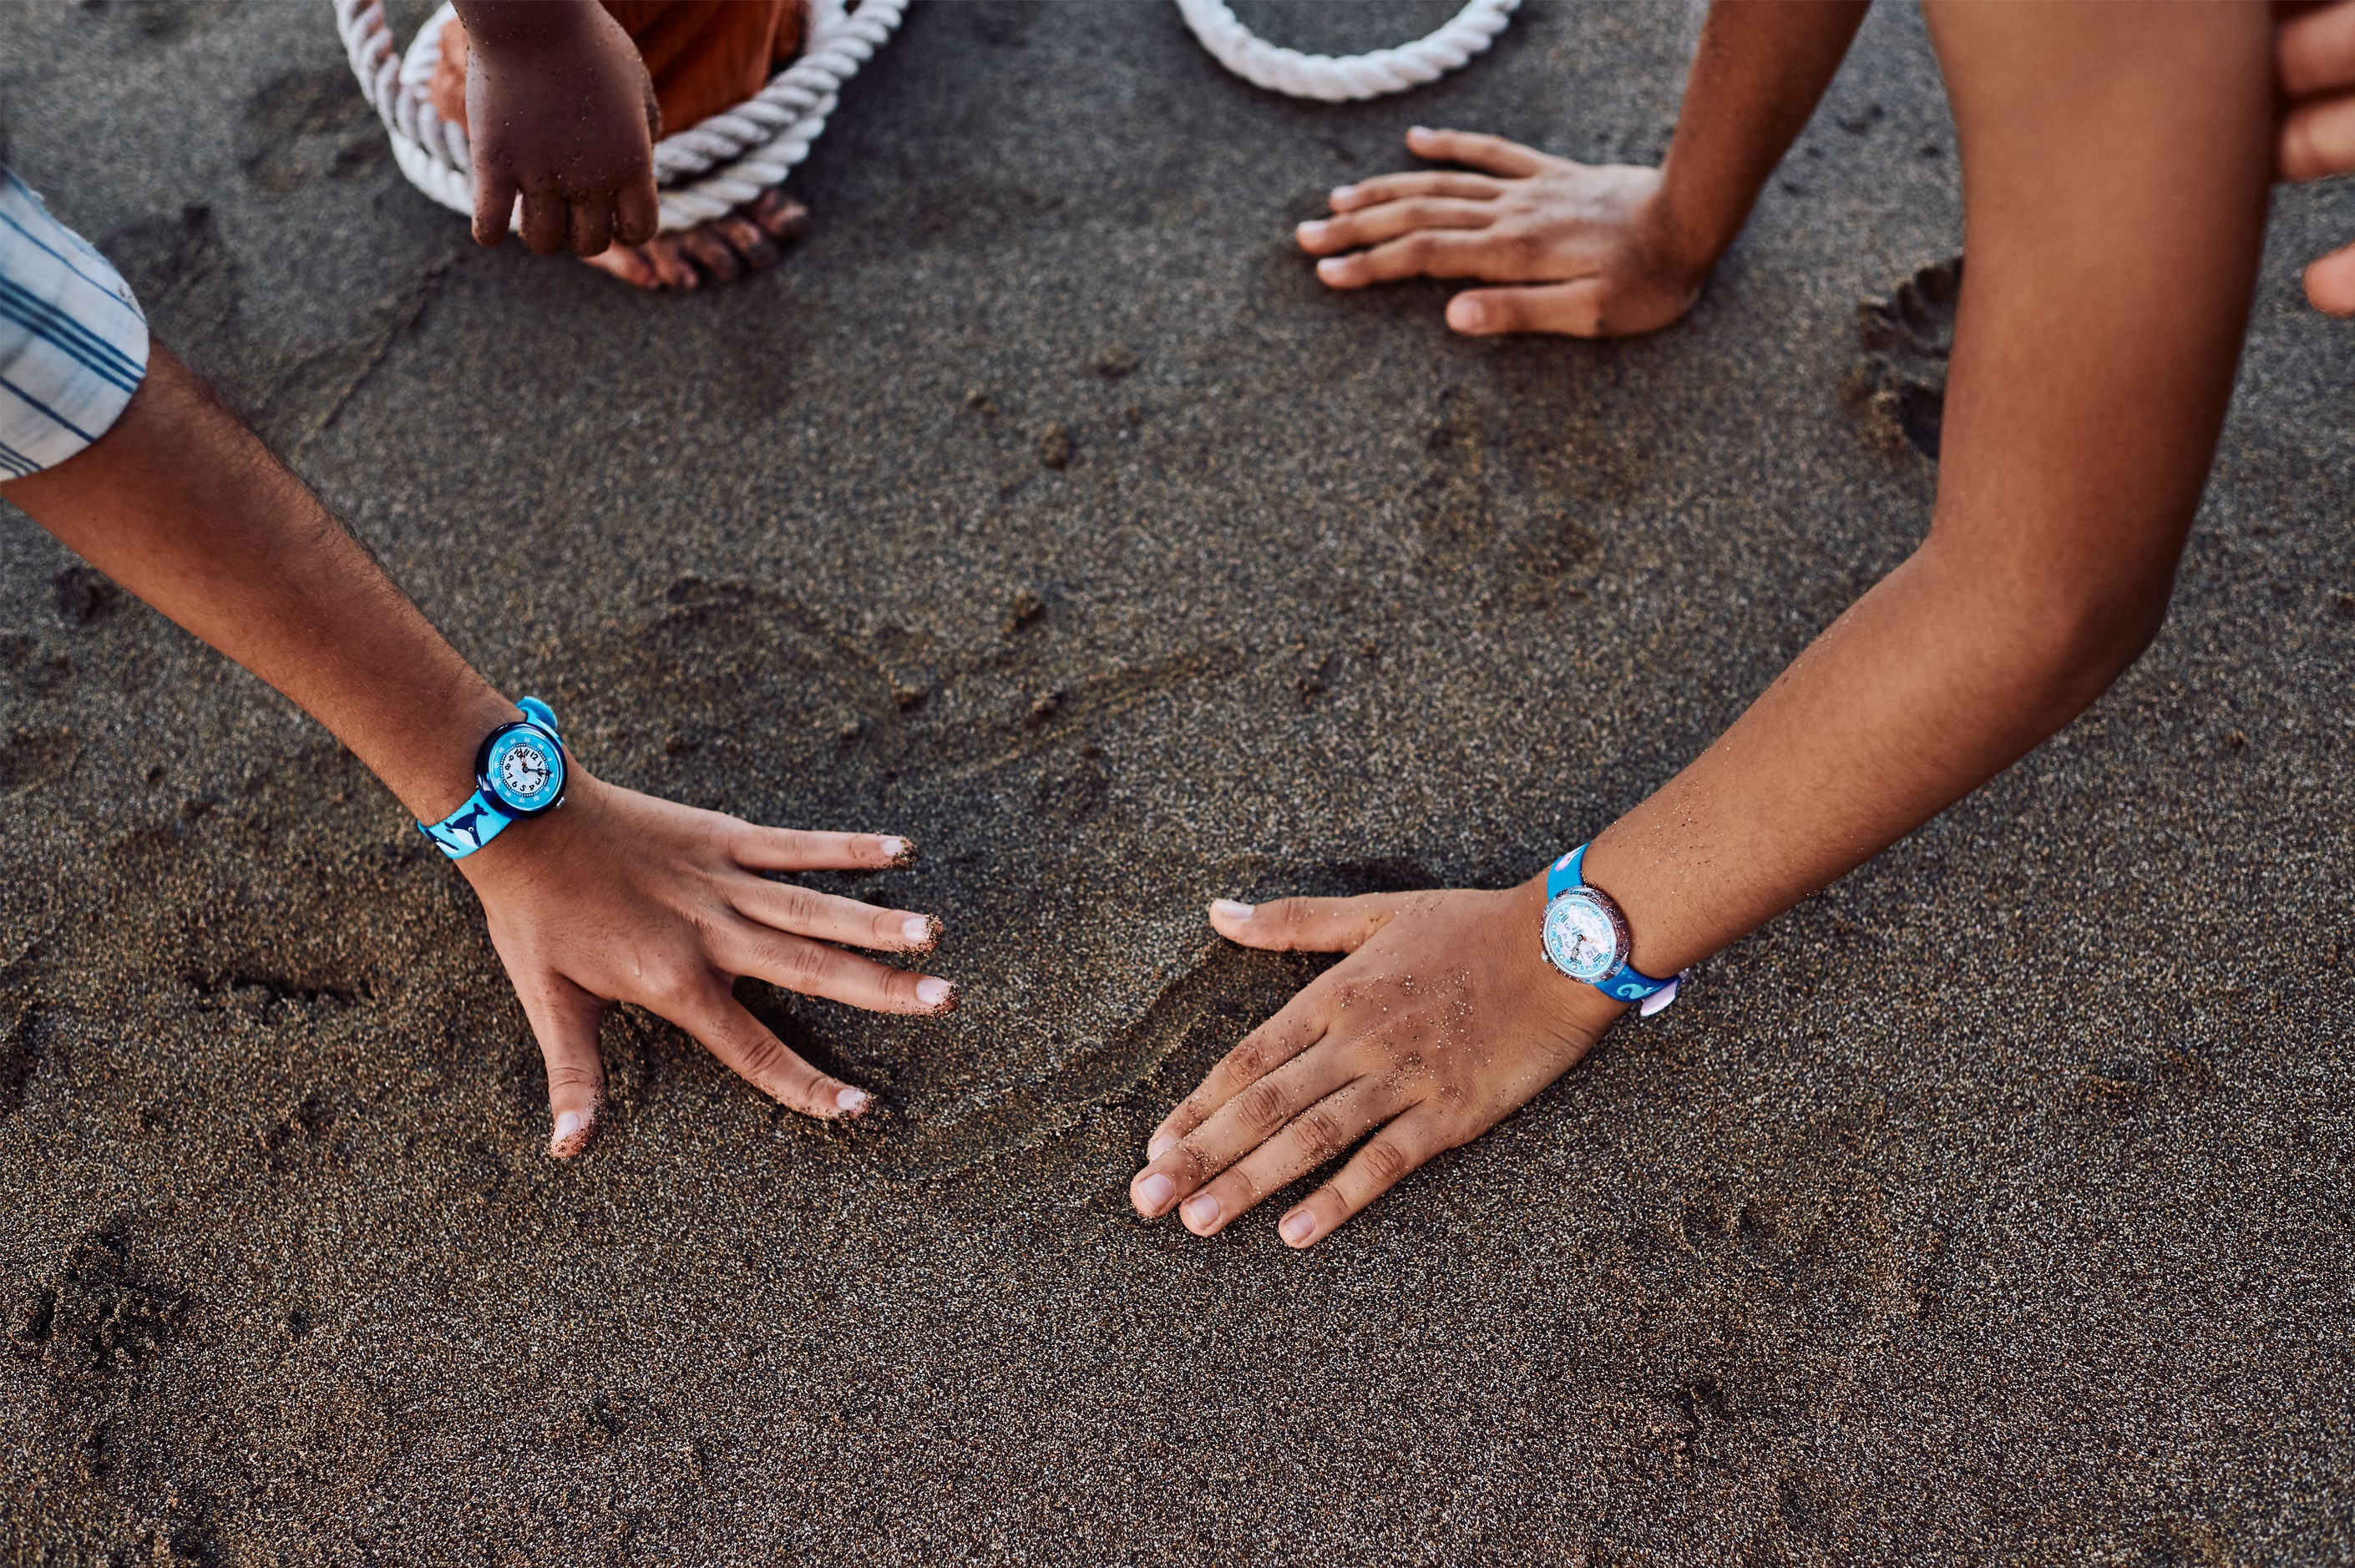 Kids wearing Flik Flak watches touching the sand on the beach